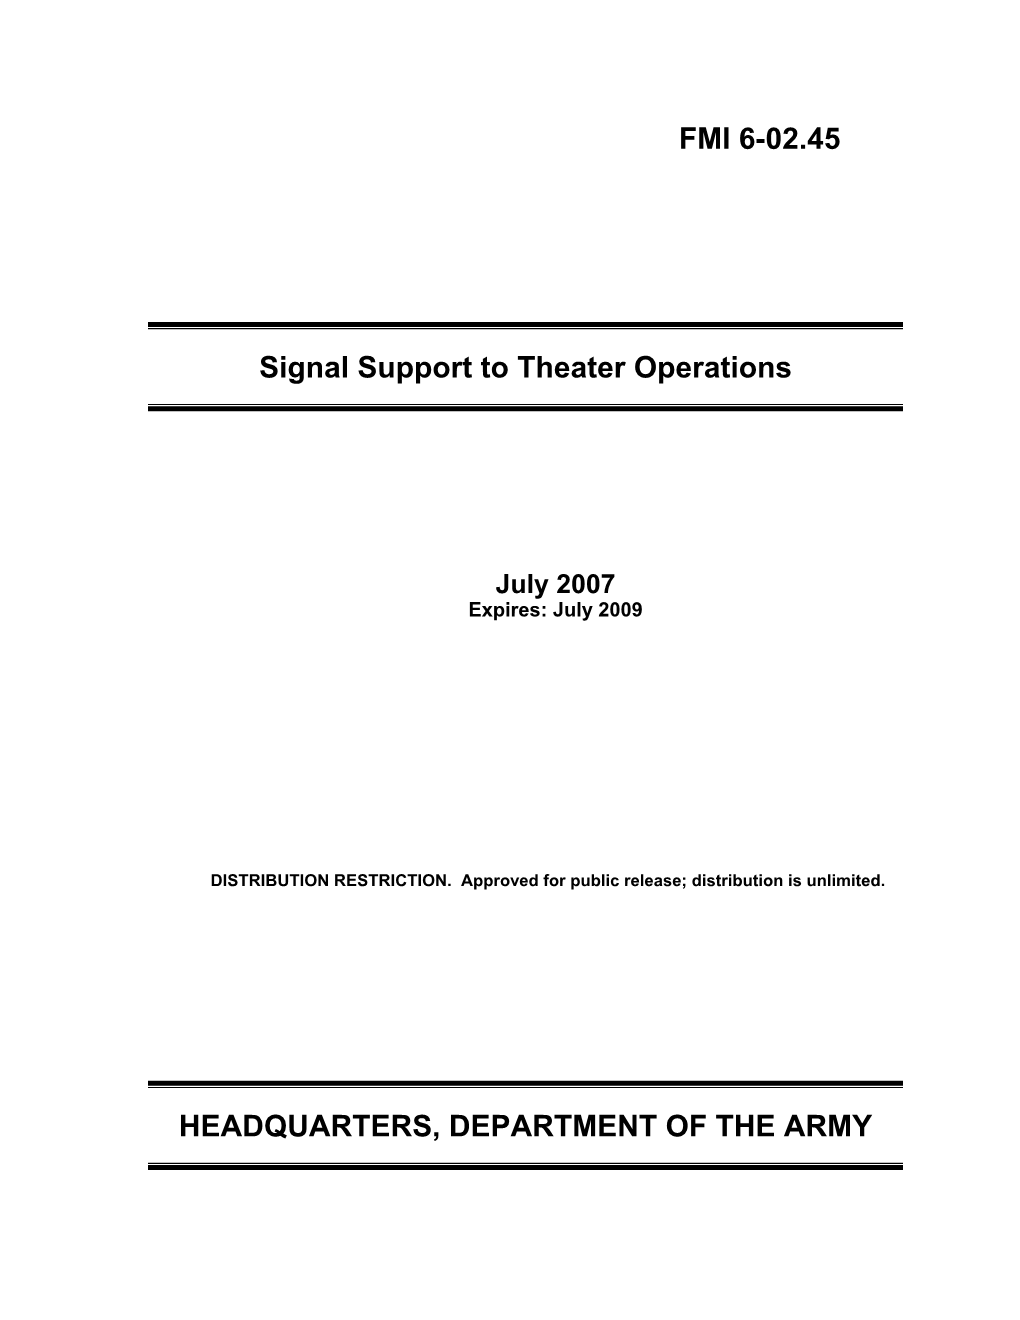 FMI 6-02.45. Signal Support to Theater Operations